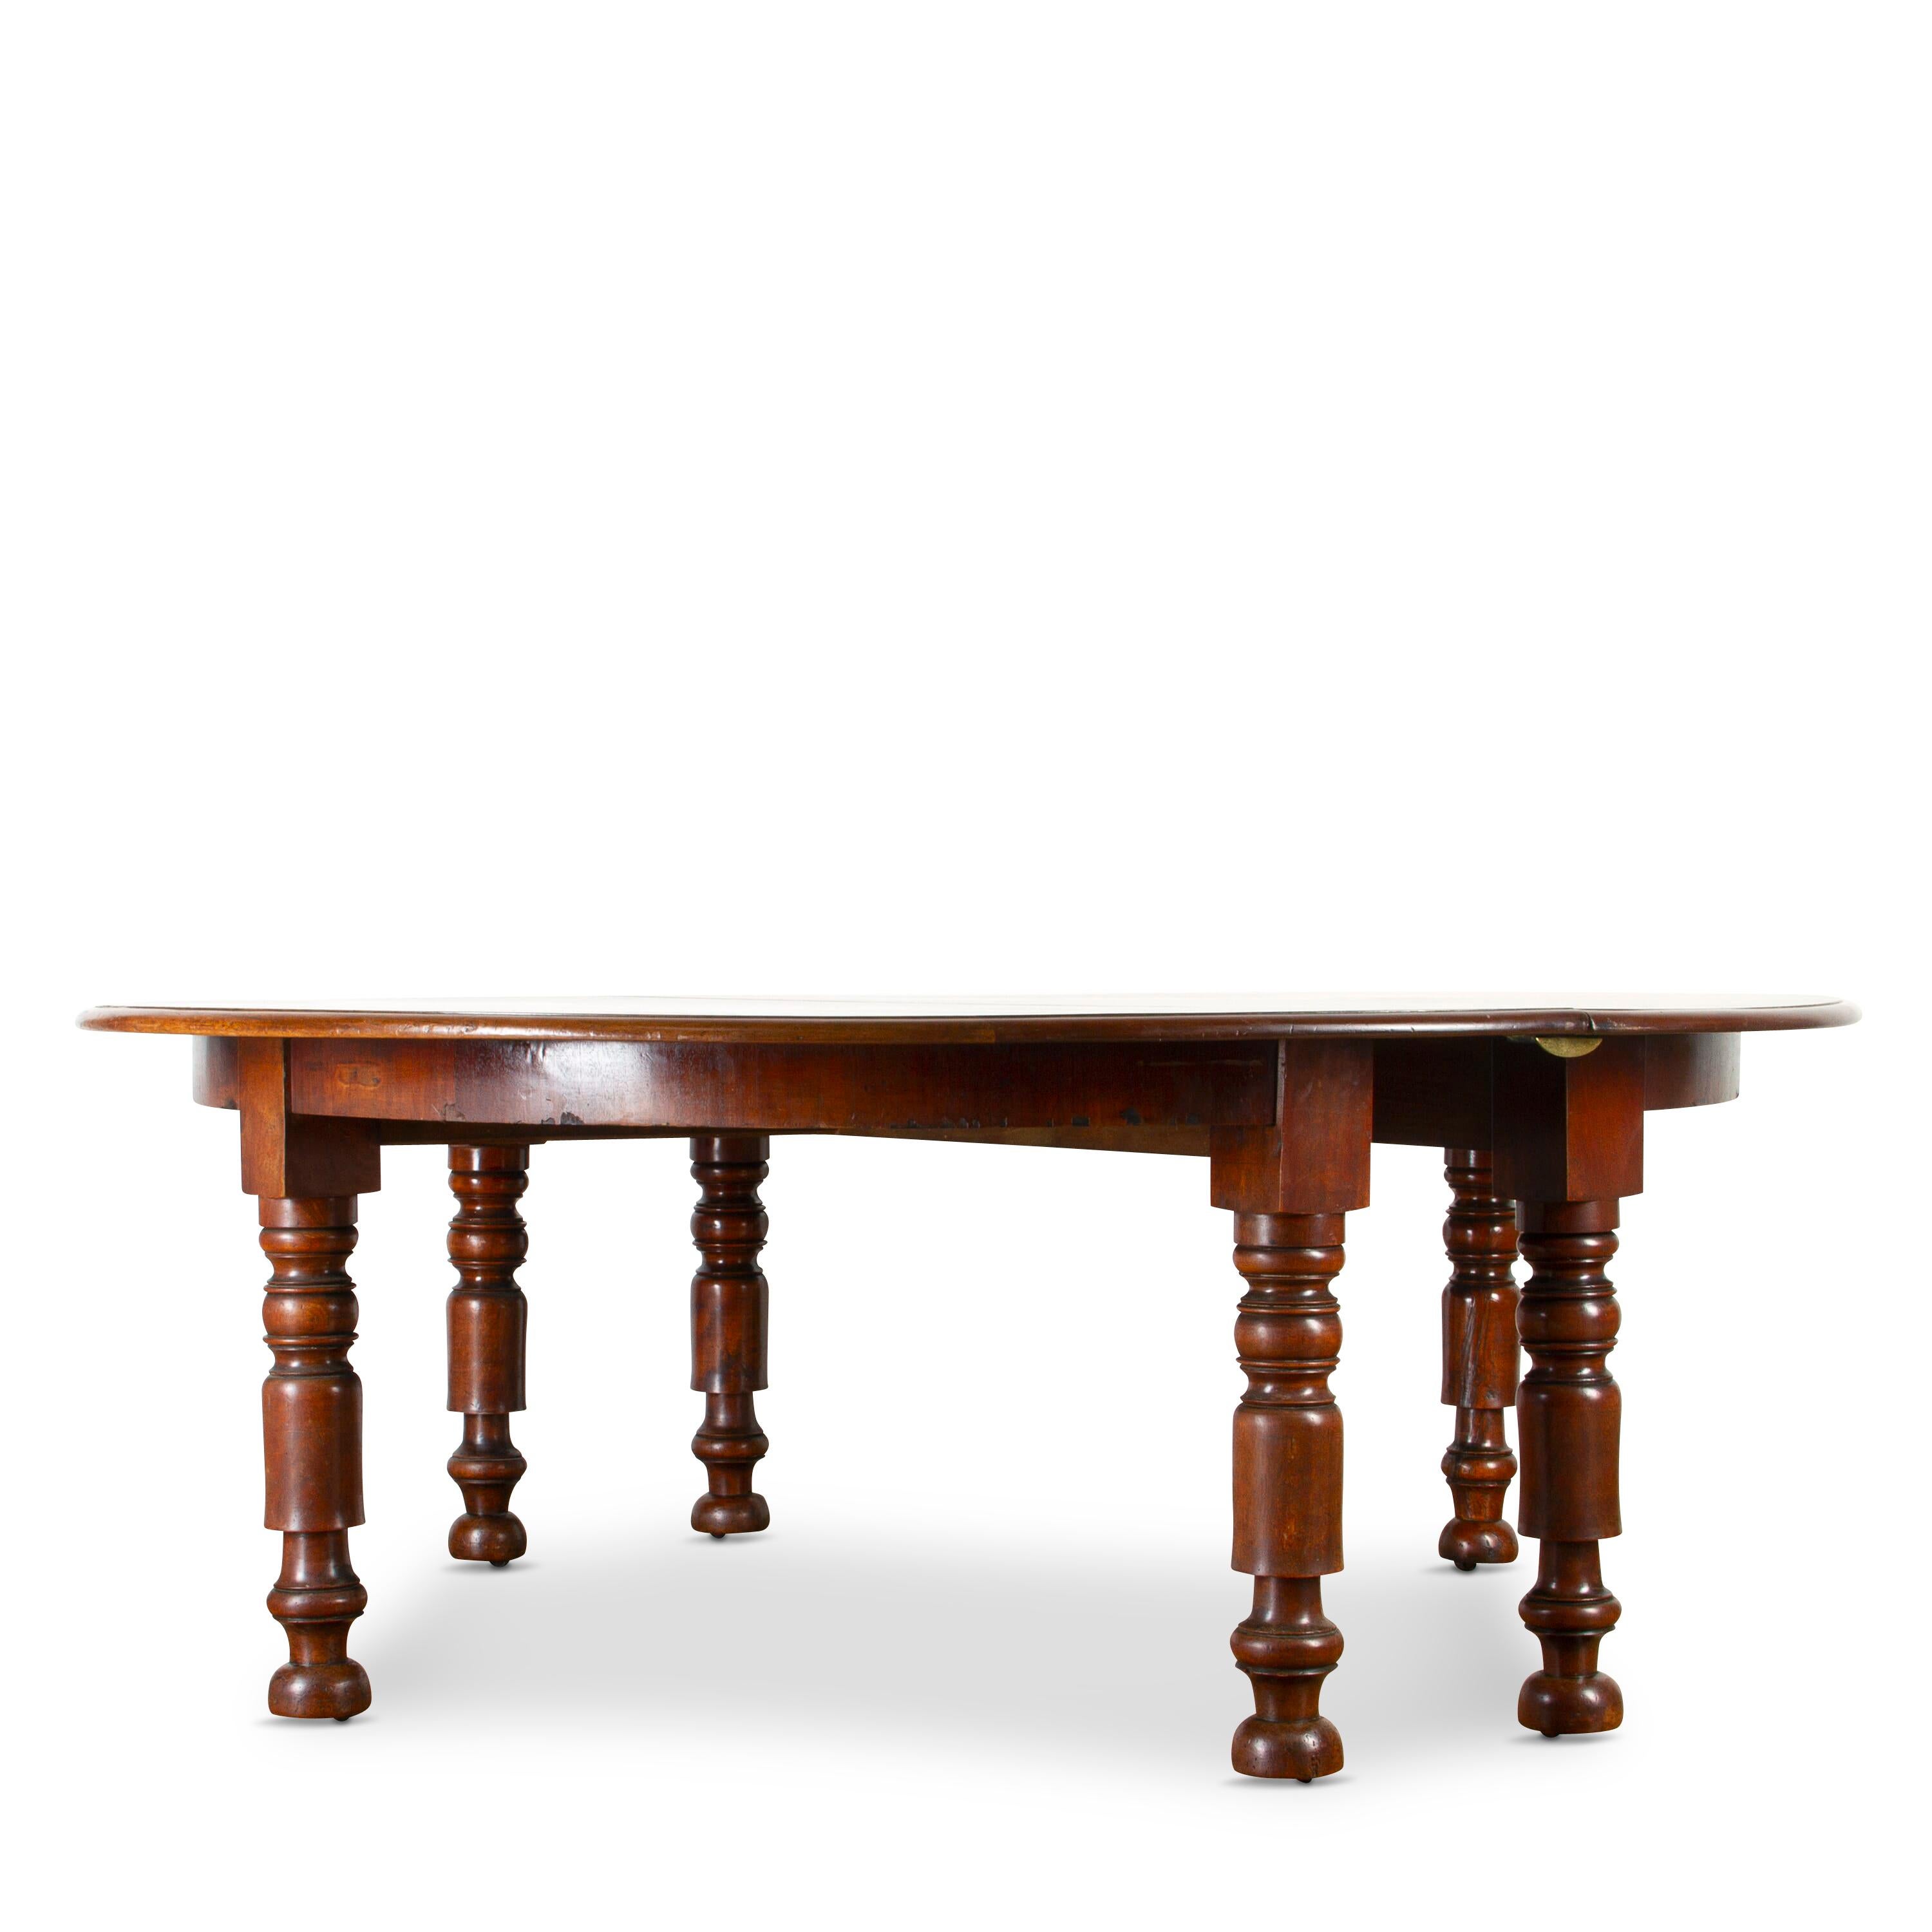 An Impressive early 19th Century French walnut round table. 
The top with moulded edge and raised on substantially turned legs with sunken castors.
It is versatile as it was made to split into two parts so that you are able to create demilune